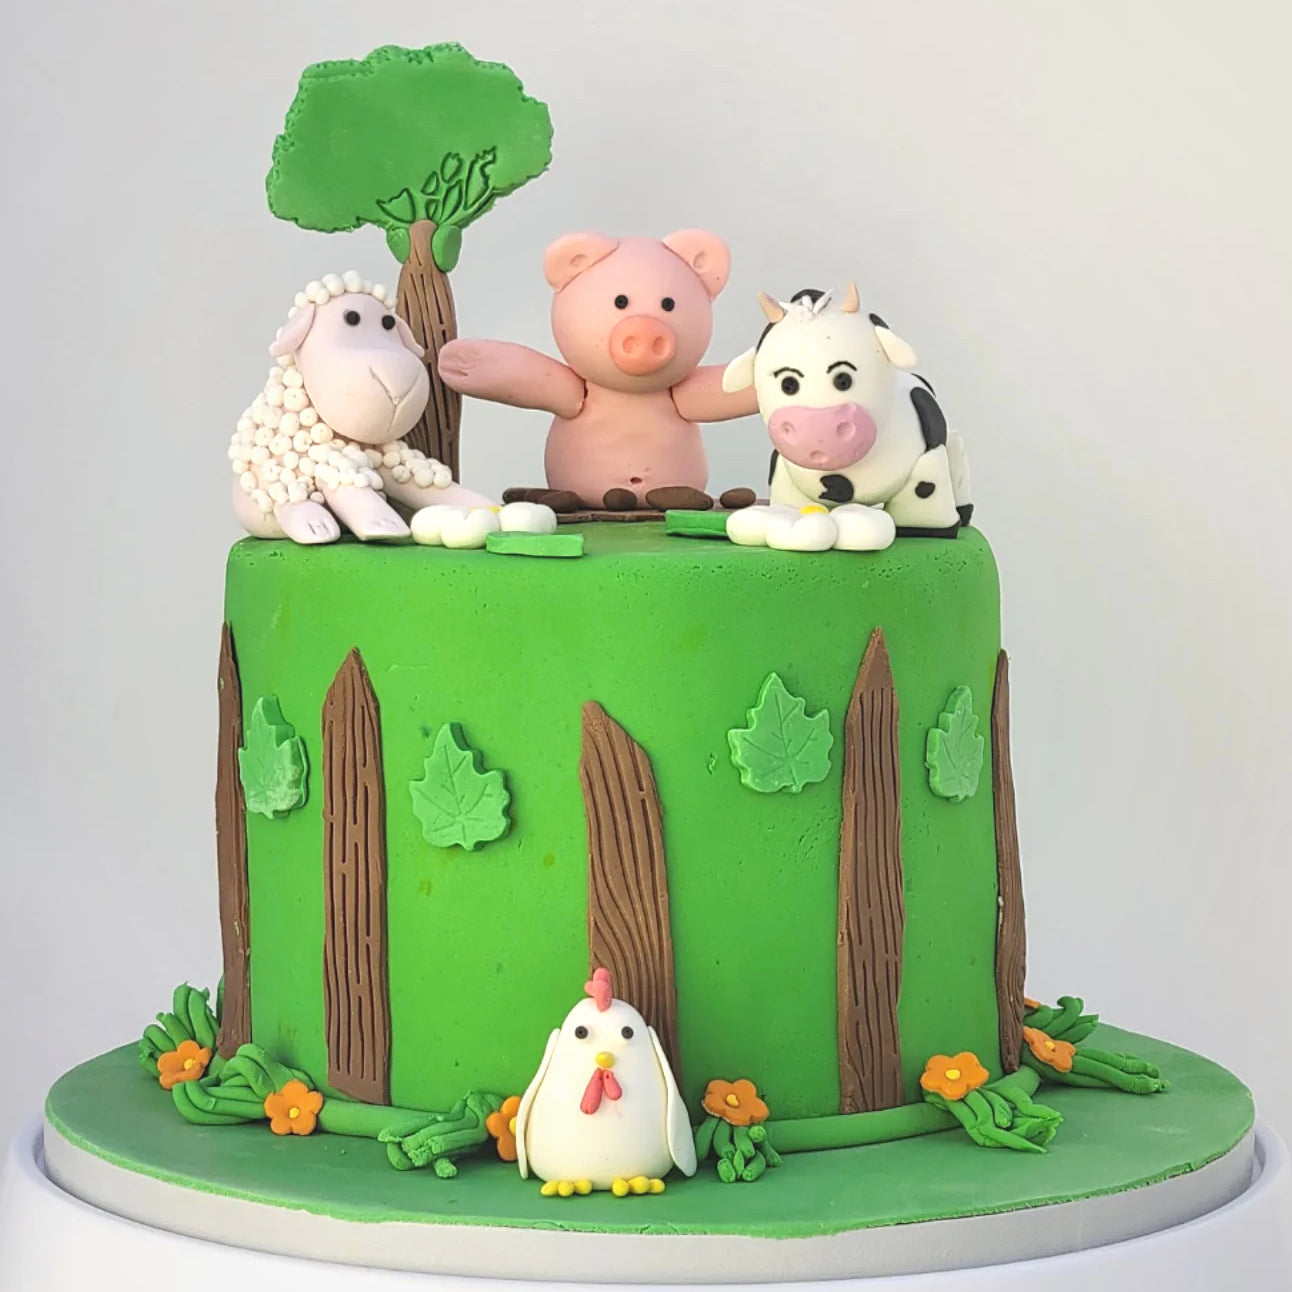 Buy Party With Farm Animals Cake| Online Cake Delivery - CakeBee